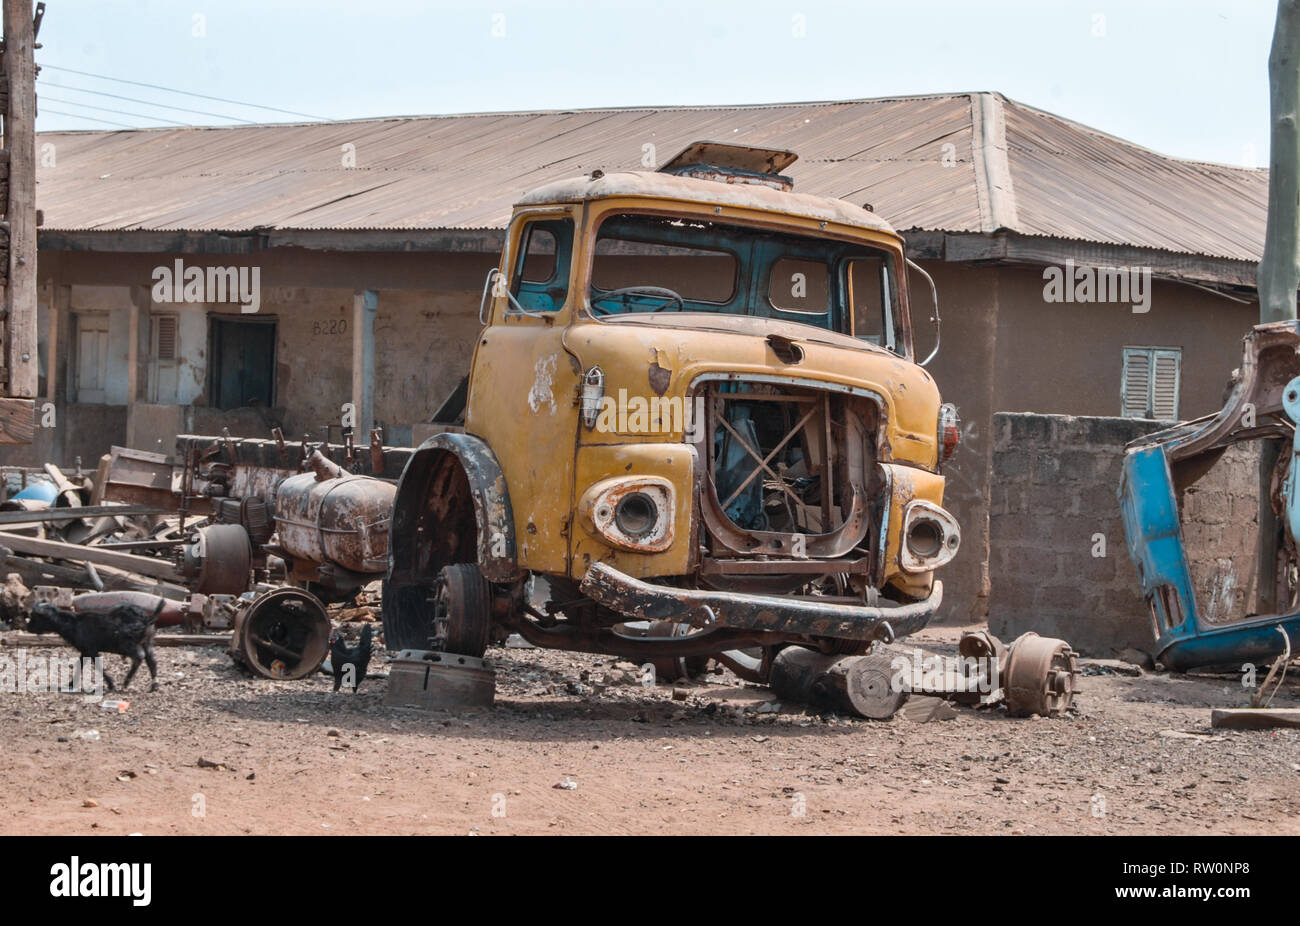 A wreckage of a yellow old truck left at a street in Bolgatanga, Ghana, West Africa Stock Photo